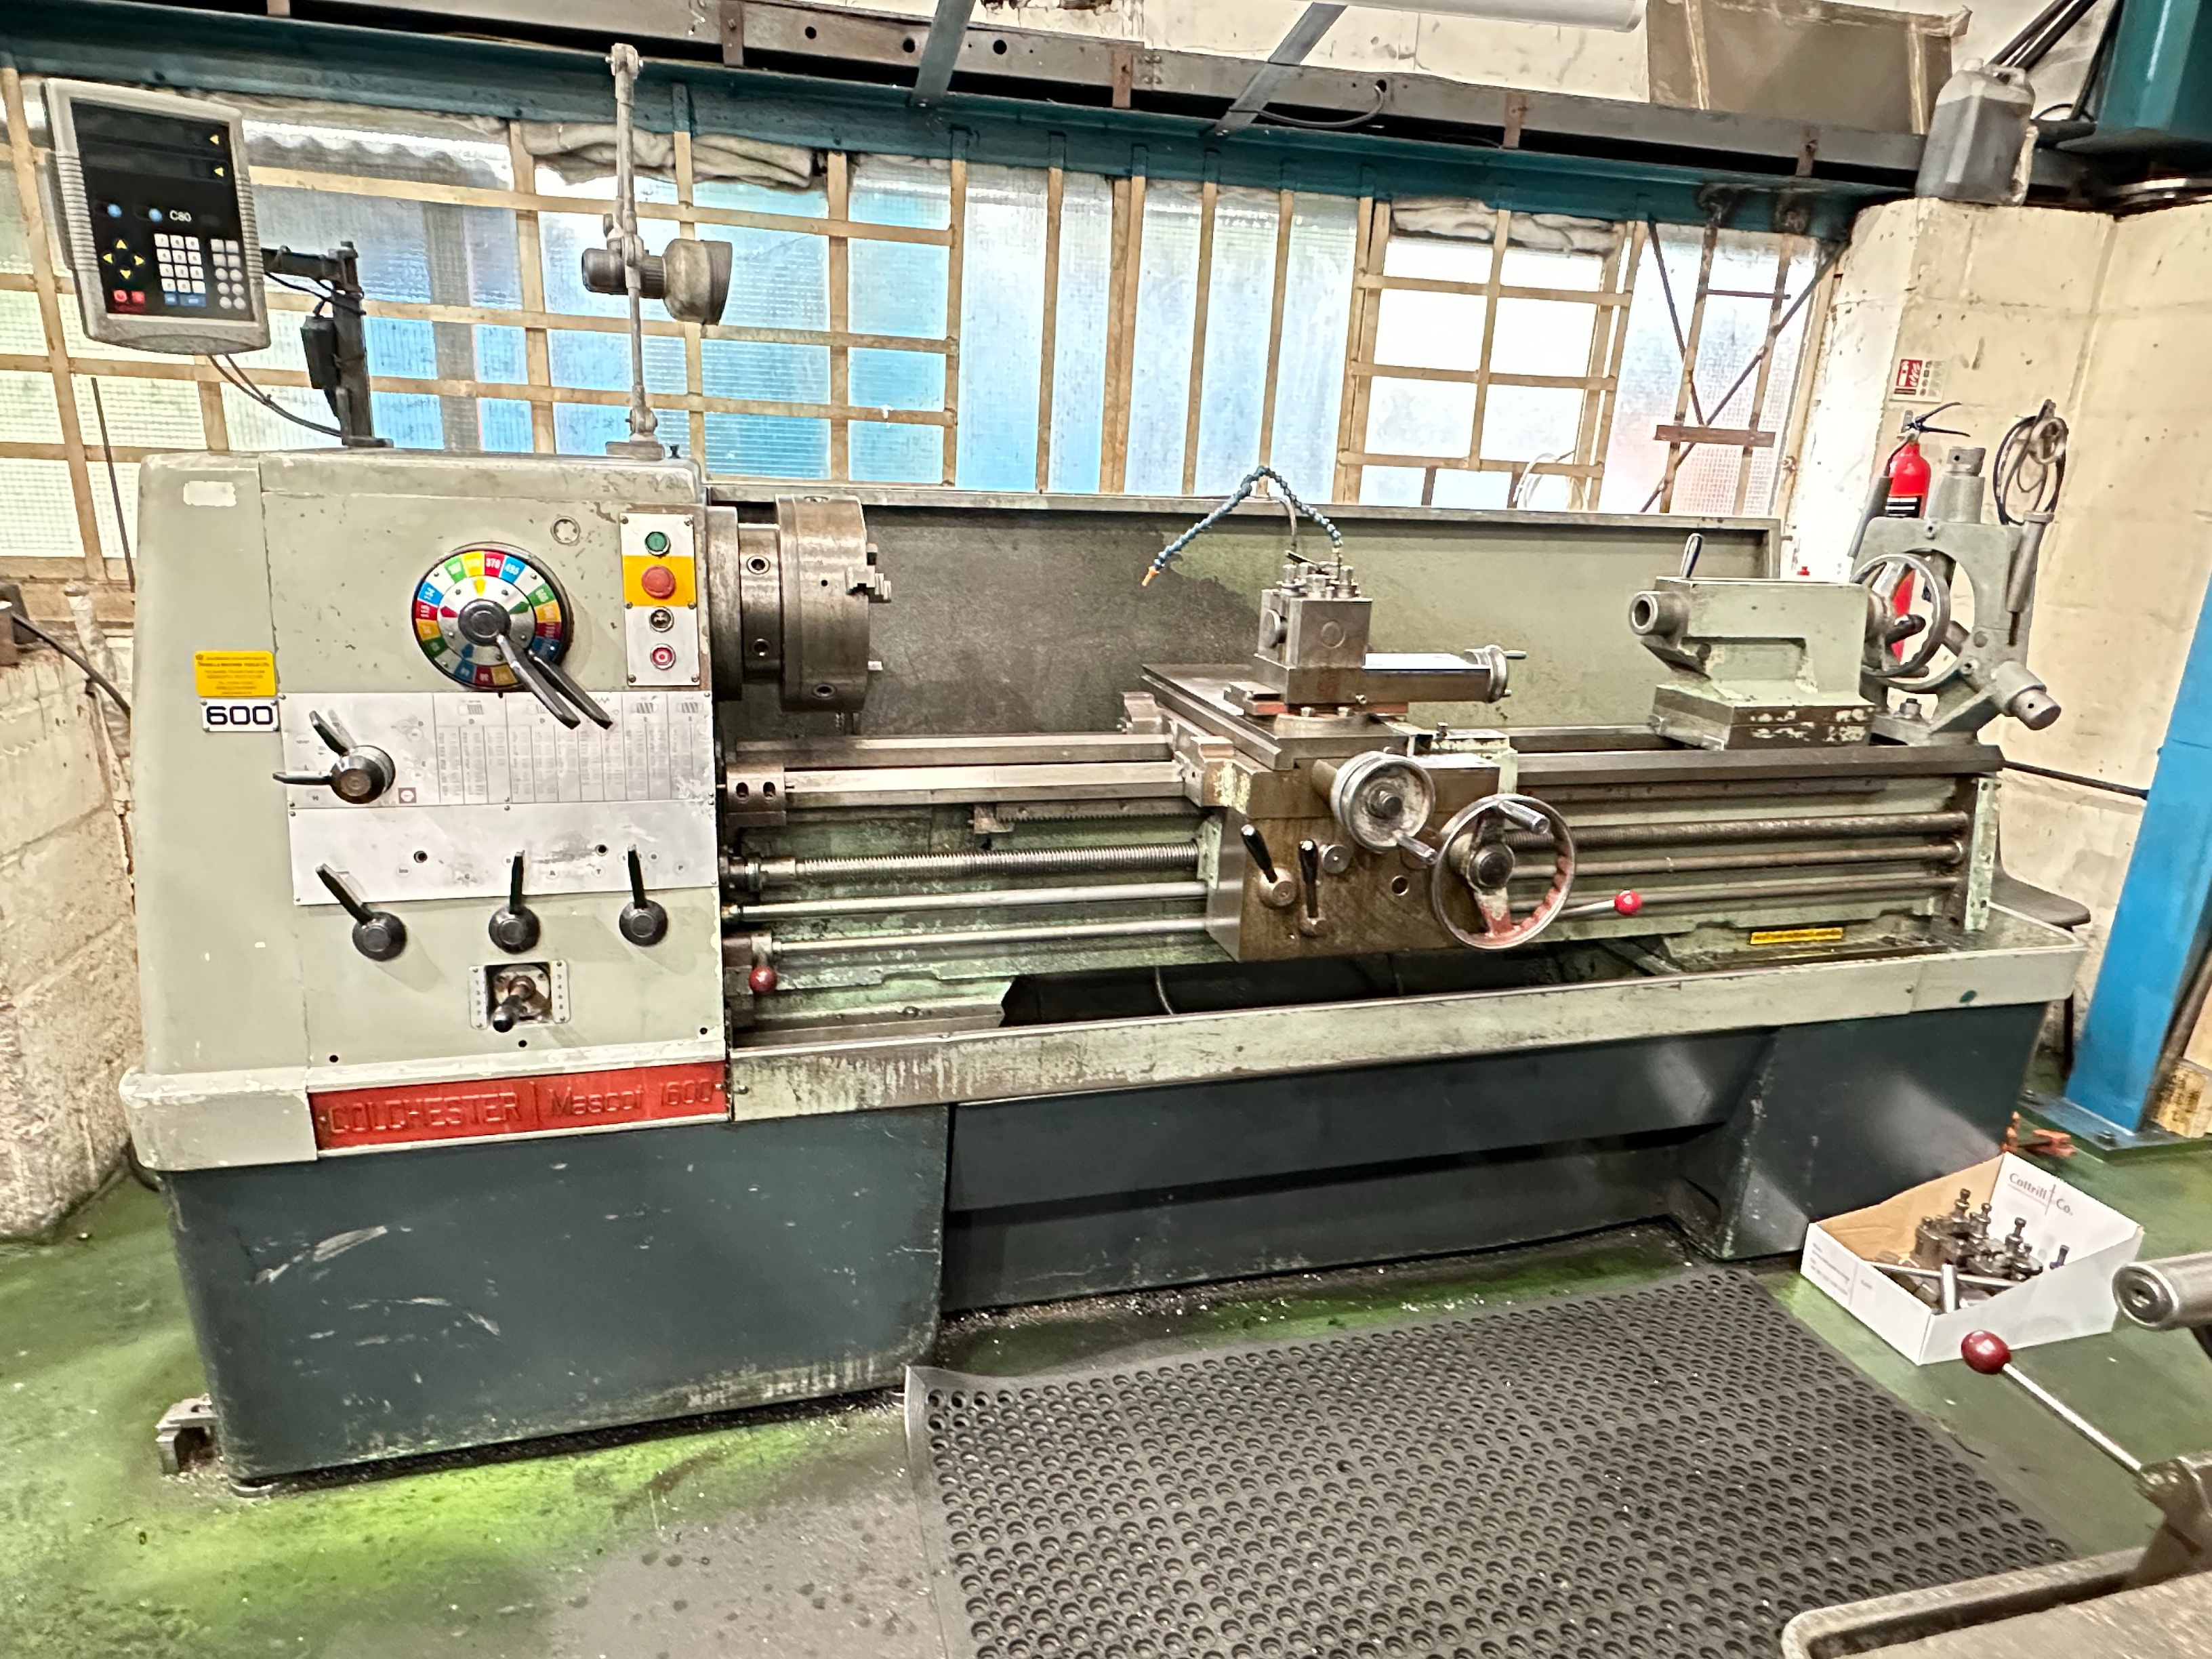 Gap Bed Lathes/Good Colchester Mascot 1600 x 60